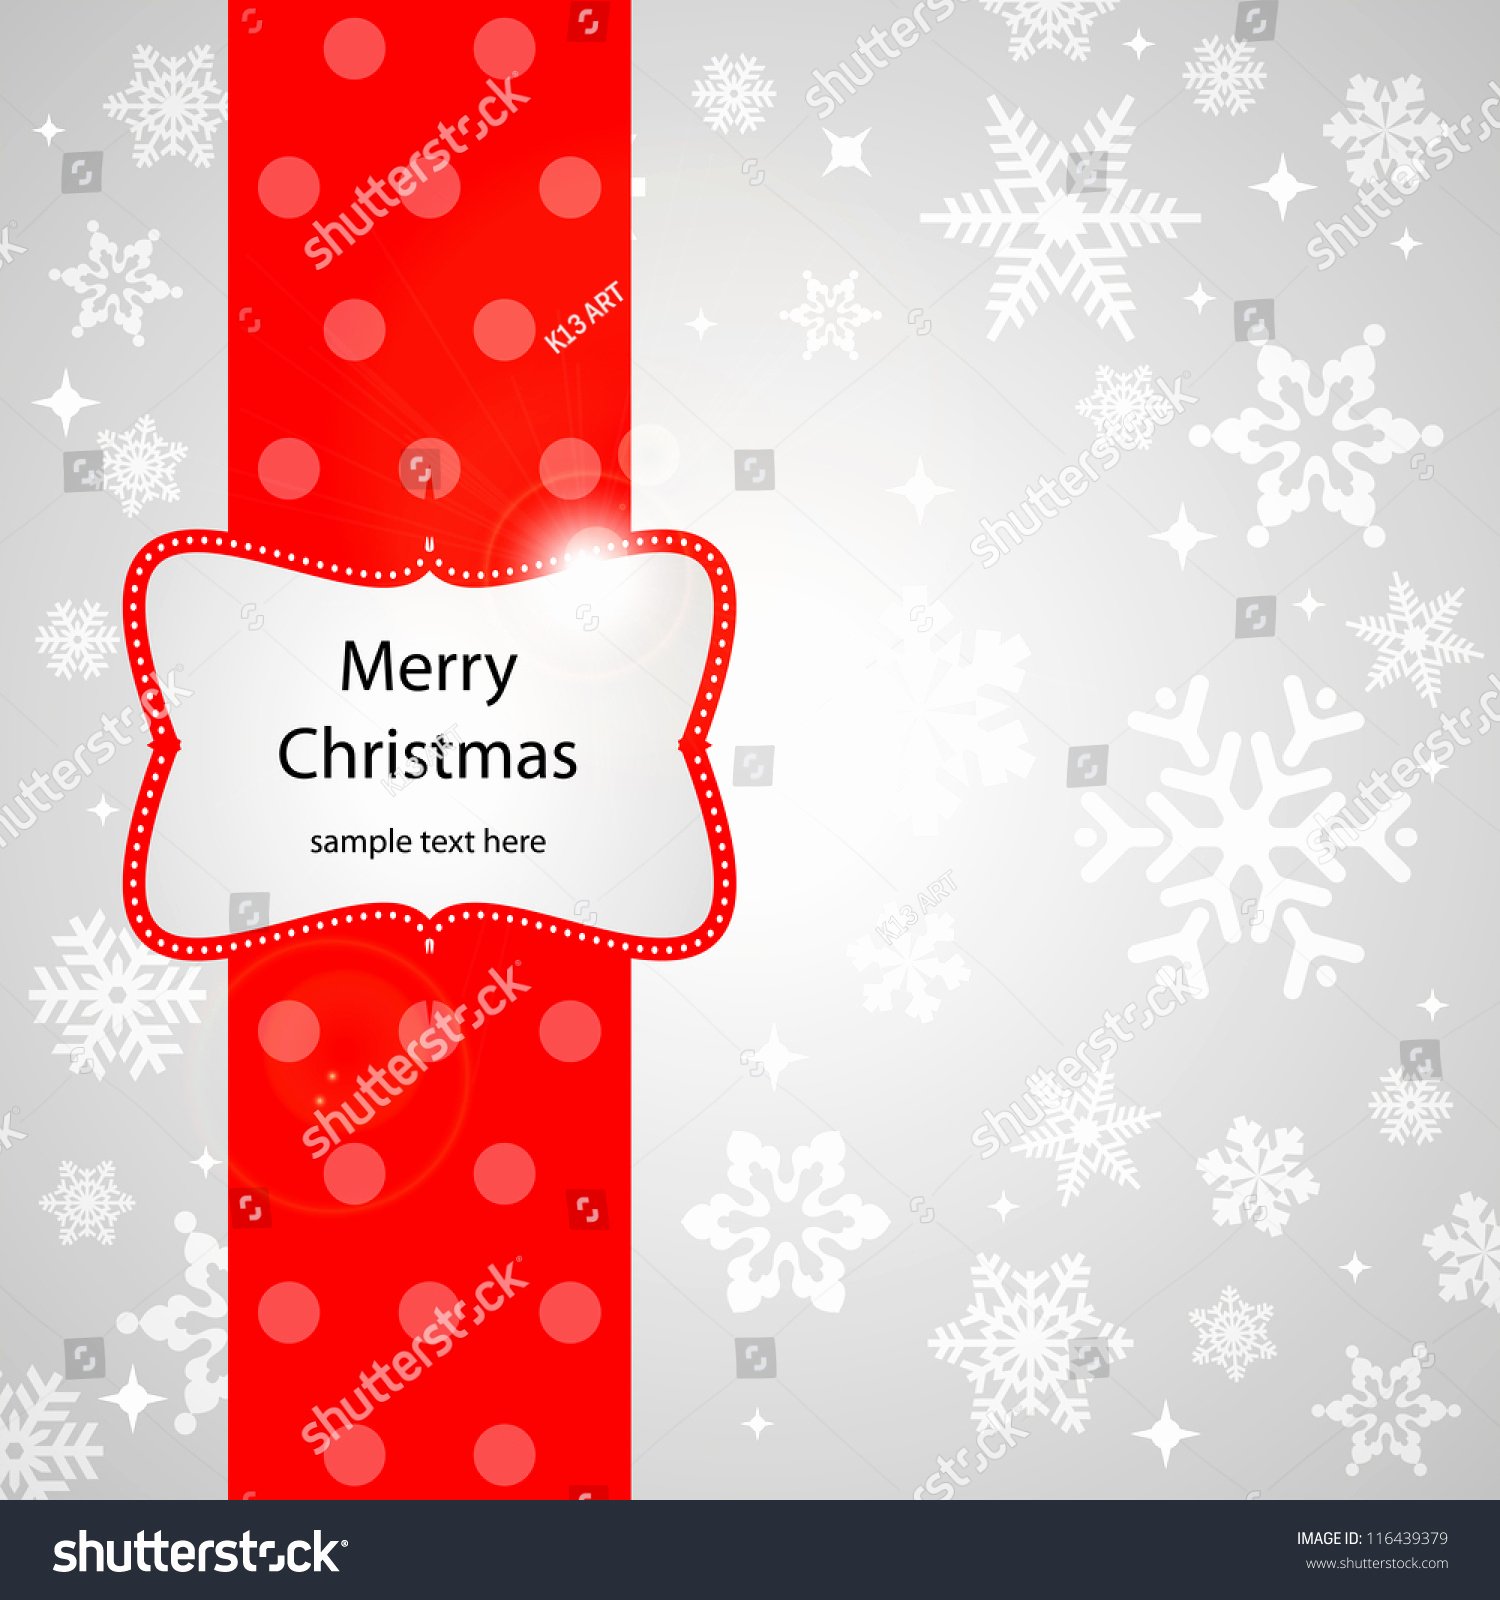 Email Template Background Image Awesome Christmas Card Template Design Background Vector